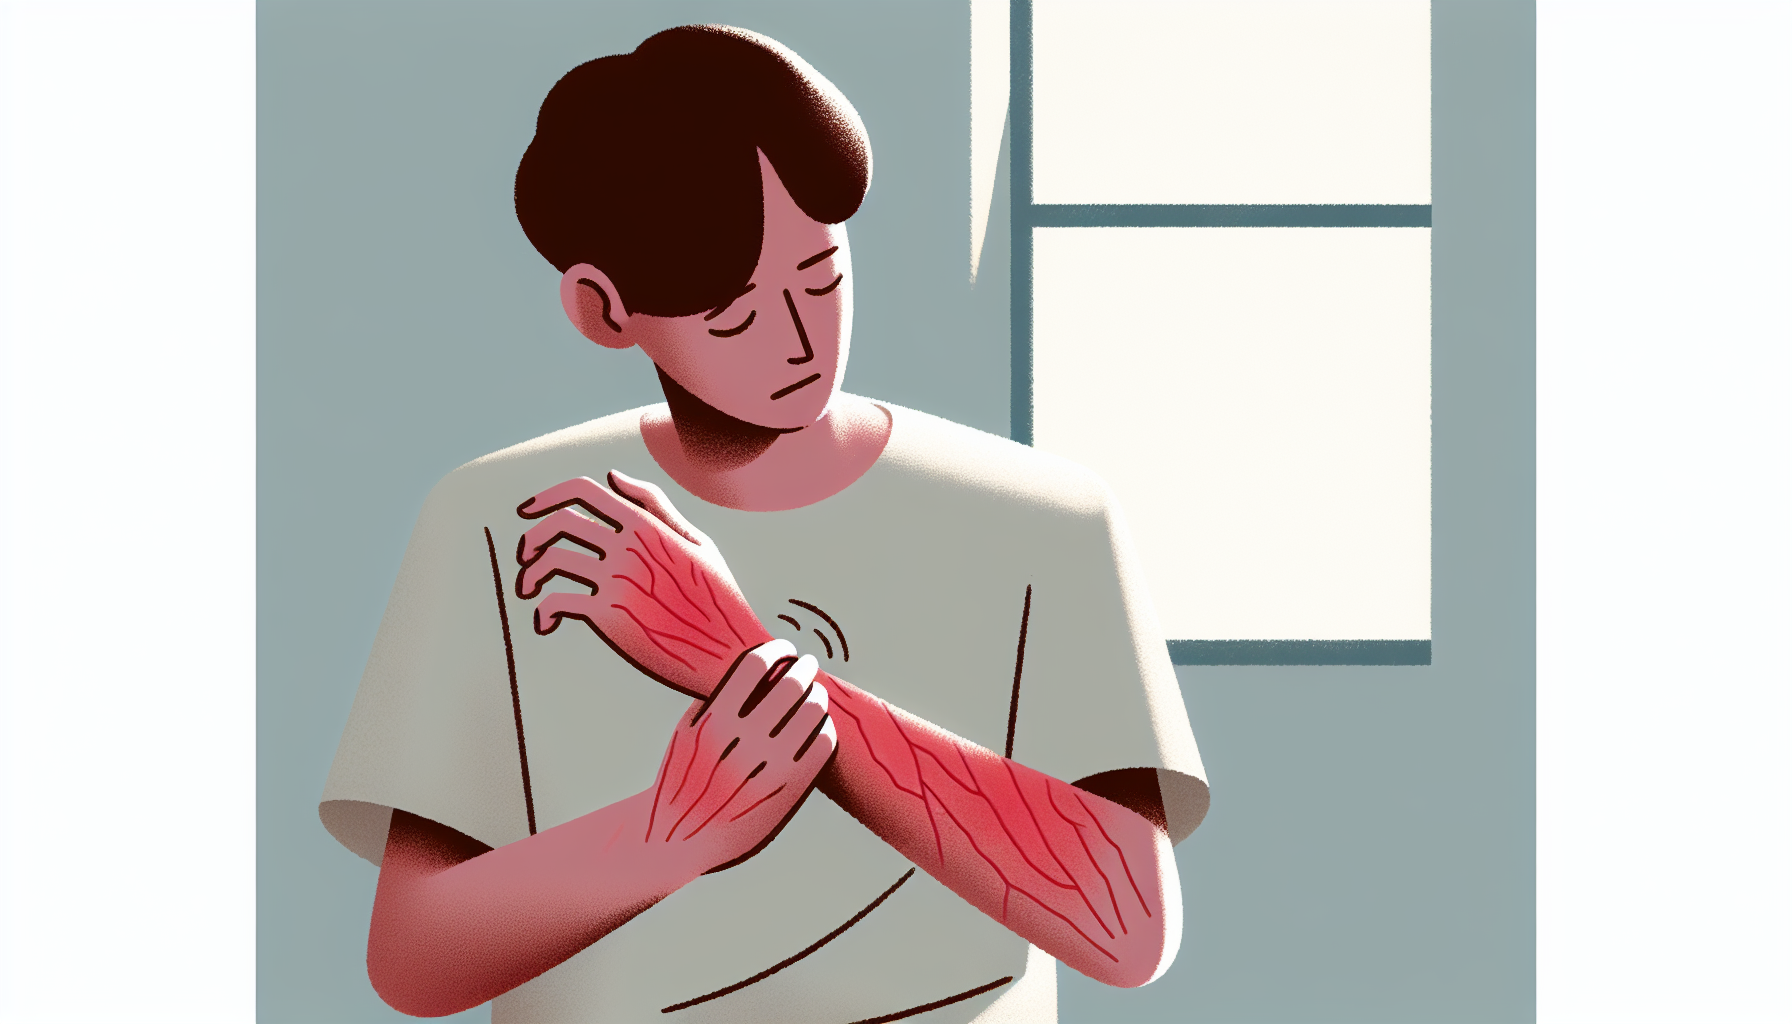 Illustration of a person scratching their arms due to itchy skin